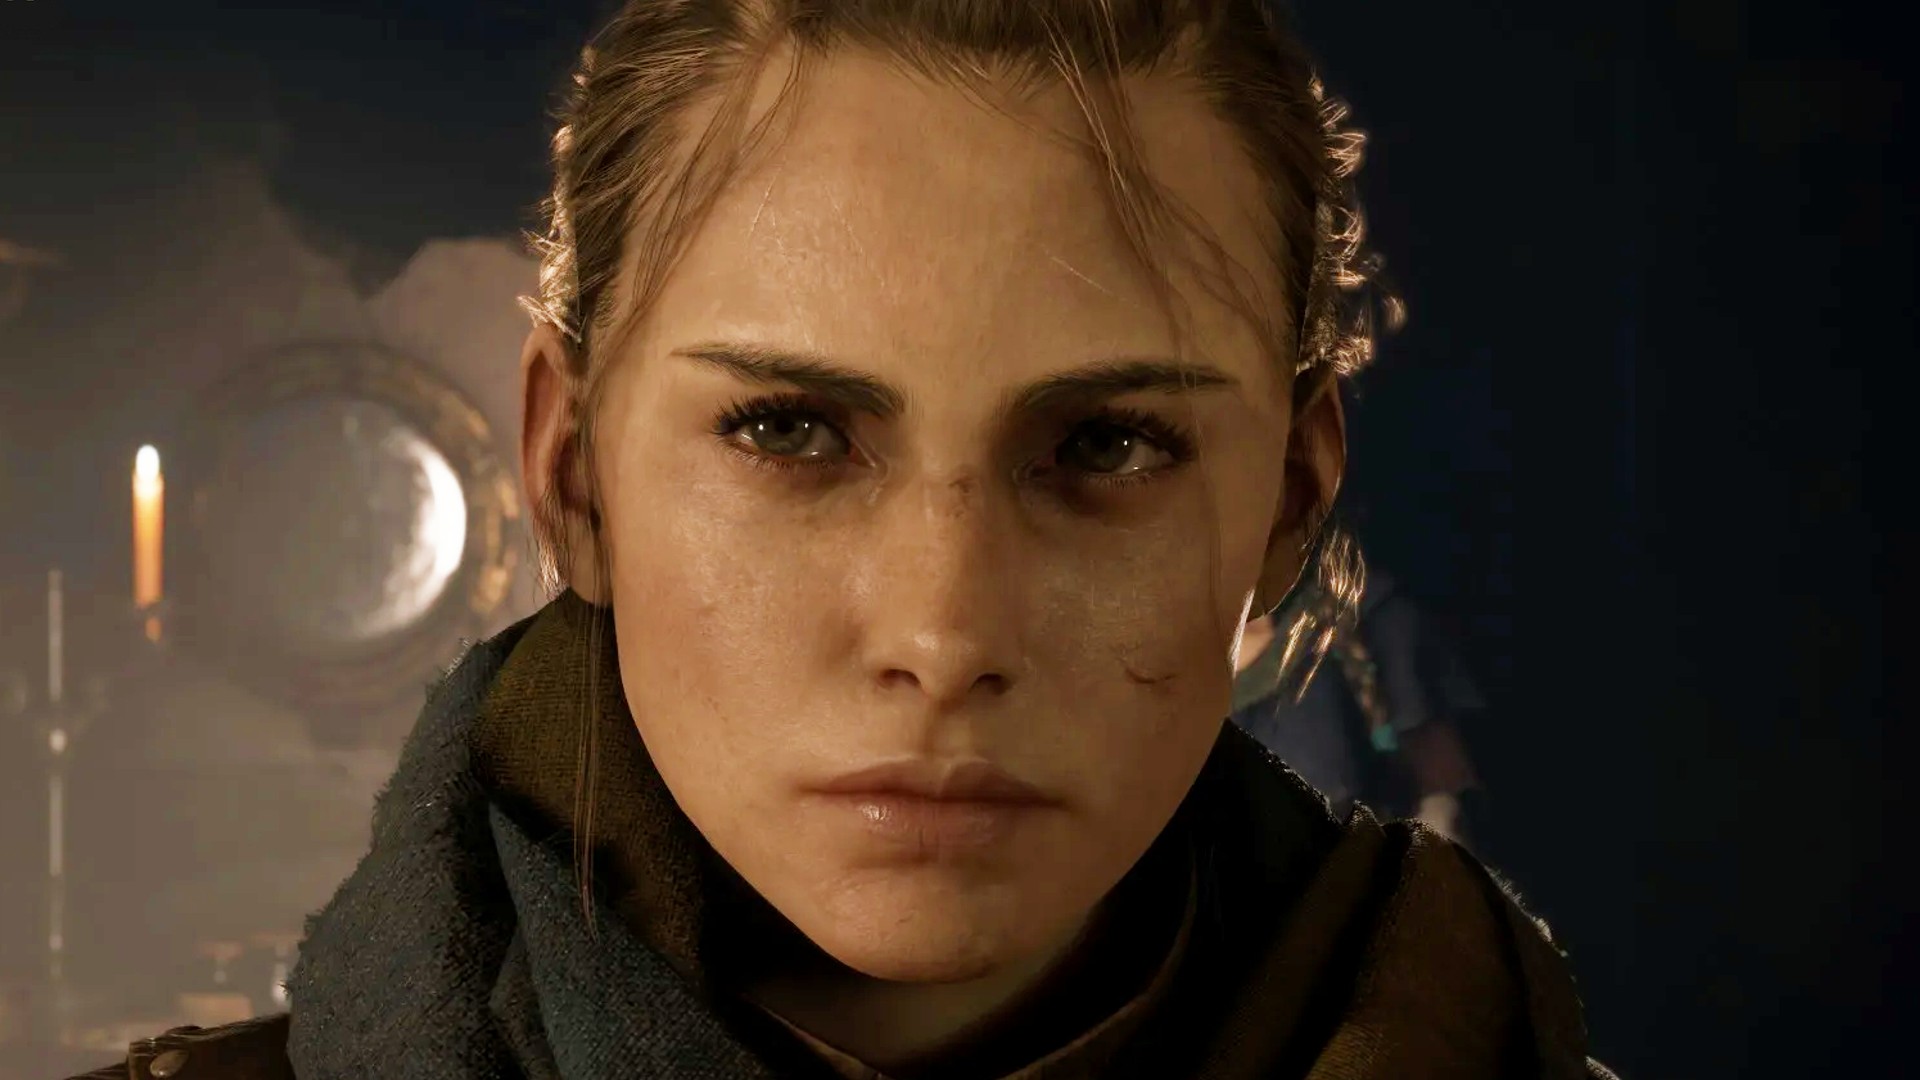 Plague Tale Requiem was an emotional “wreck room” for Amicia’s VA